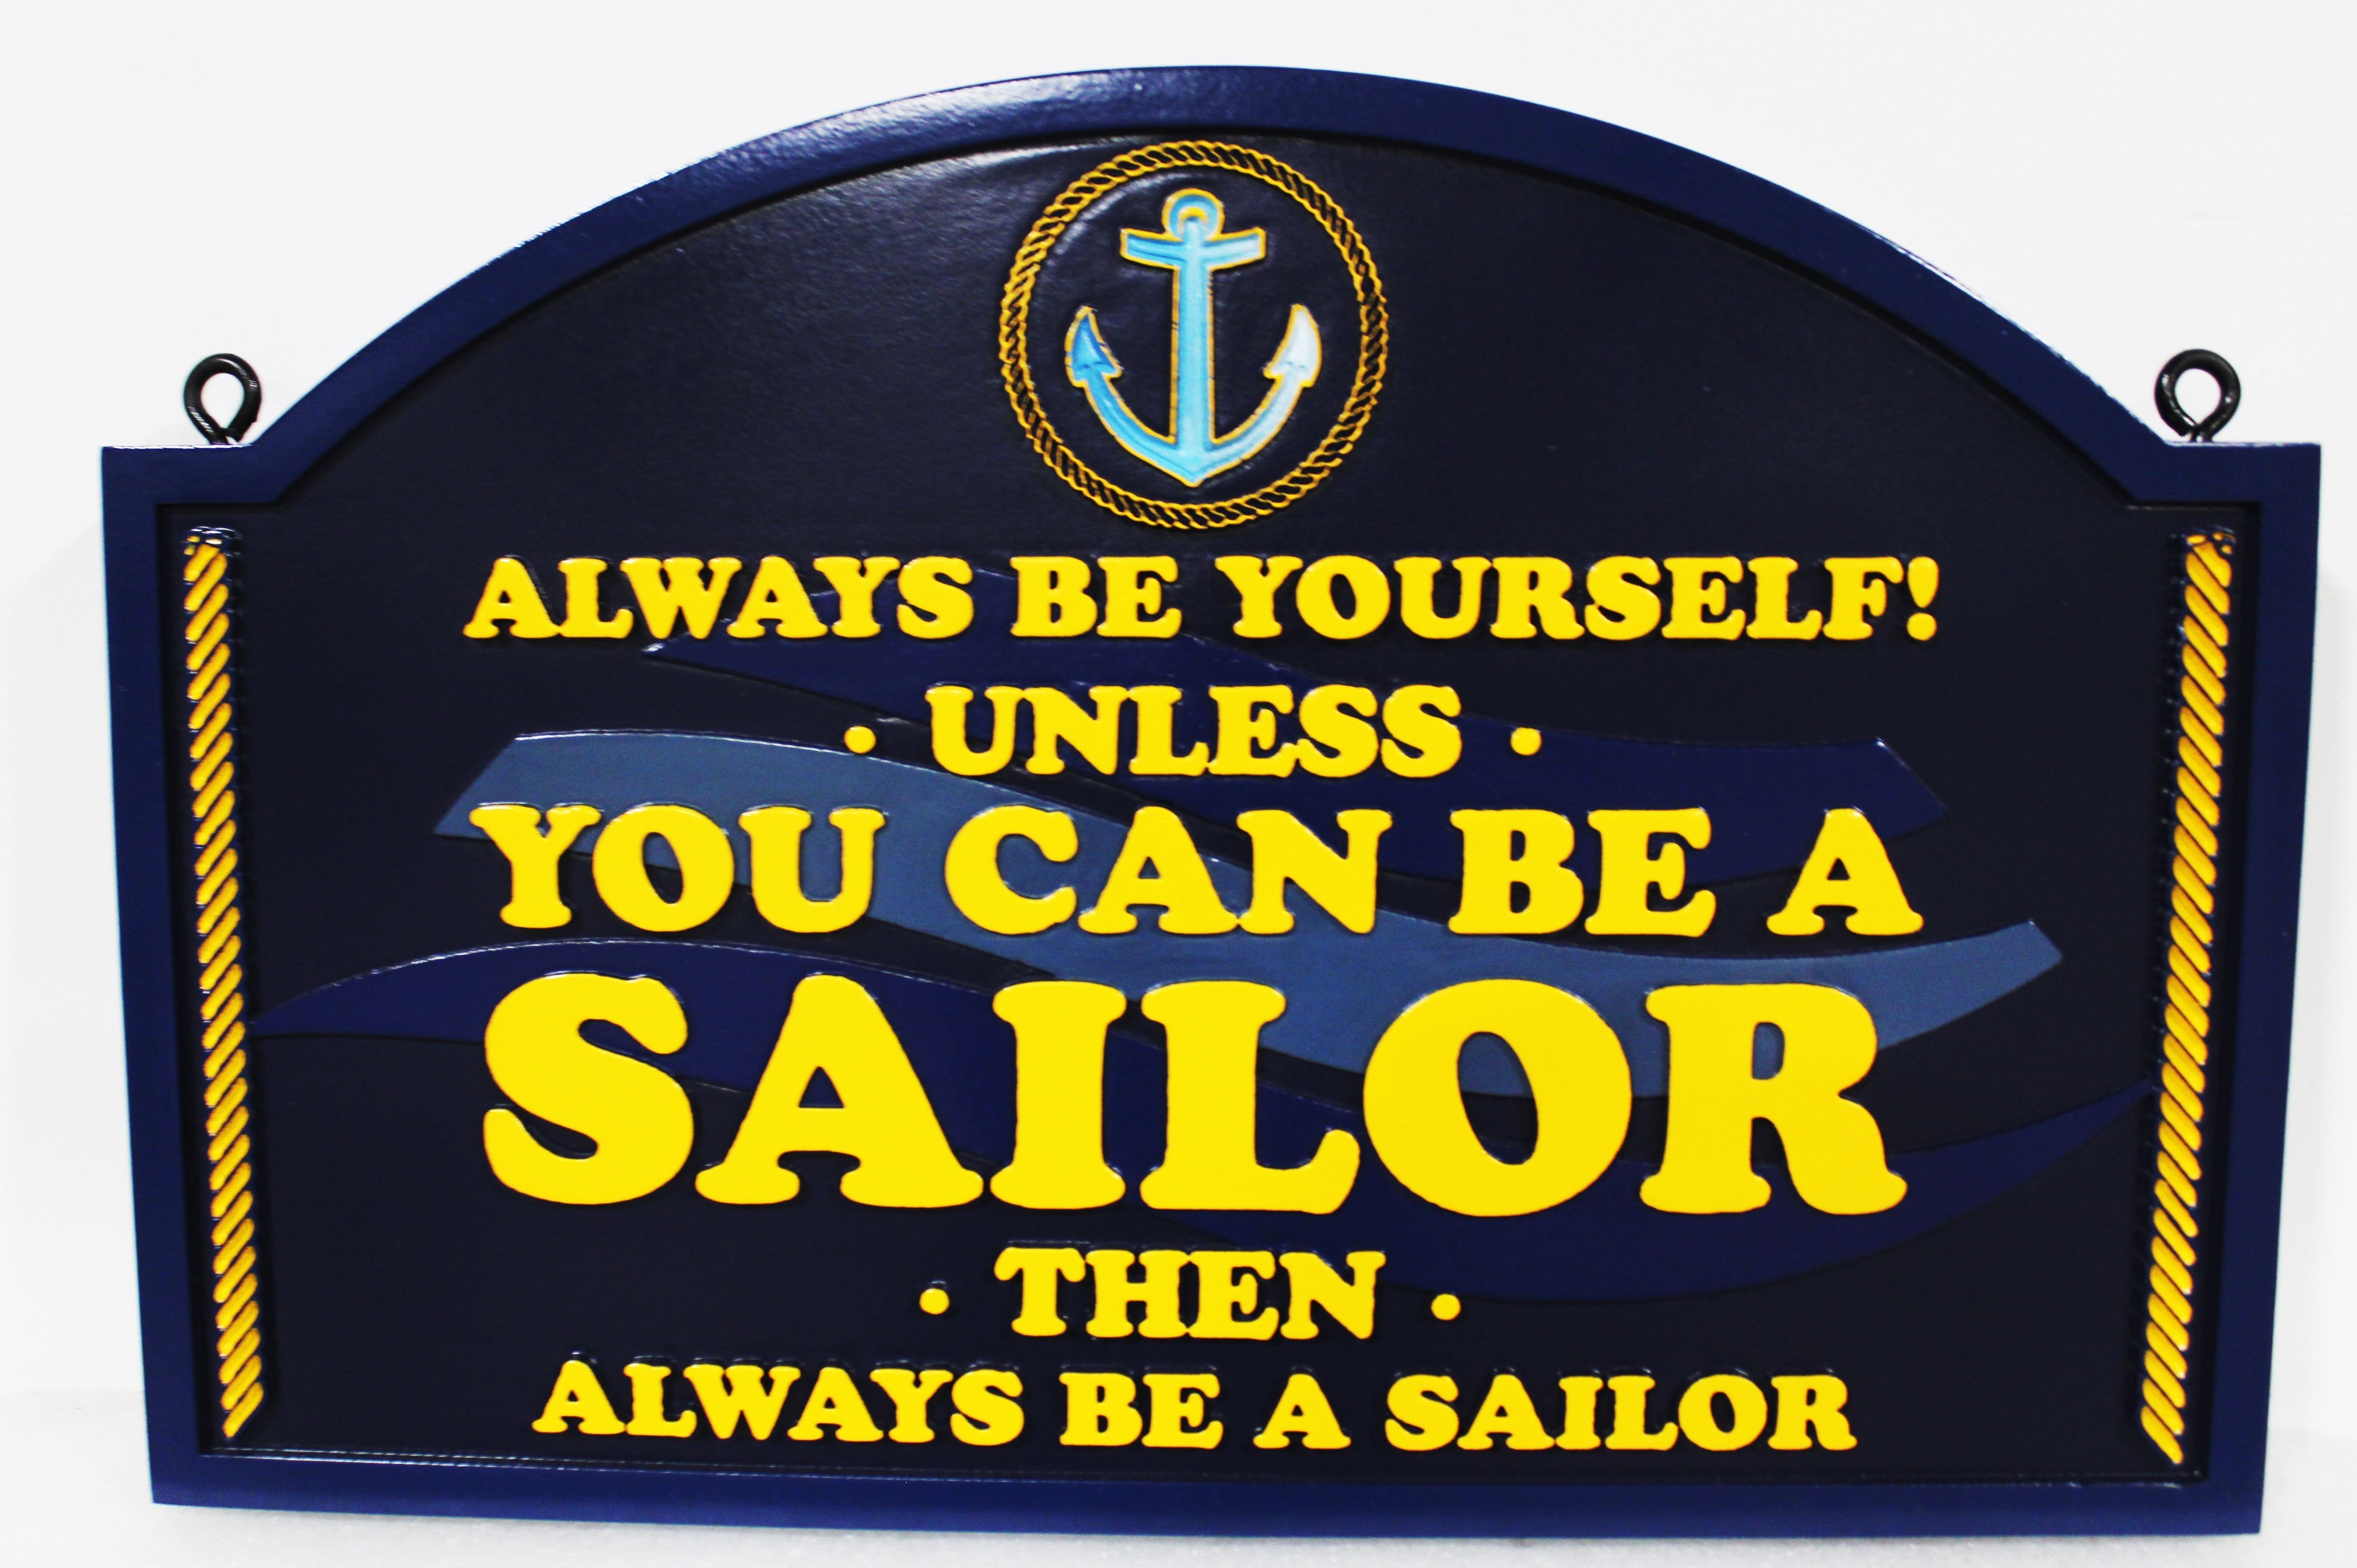 L22534 - Carved 2.5-D Multi-level raised Relief  HDU Sign "You Can Be a Sailor" 